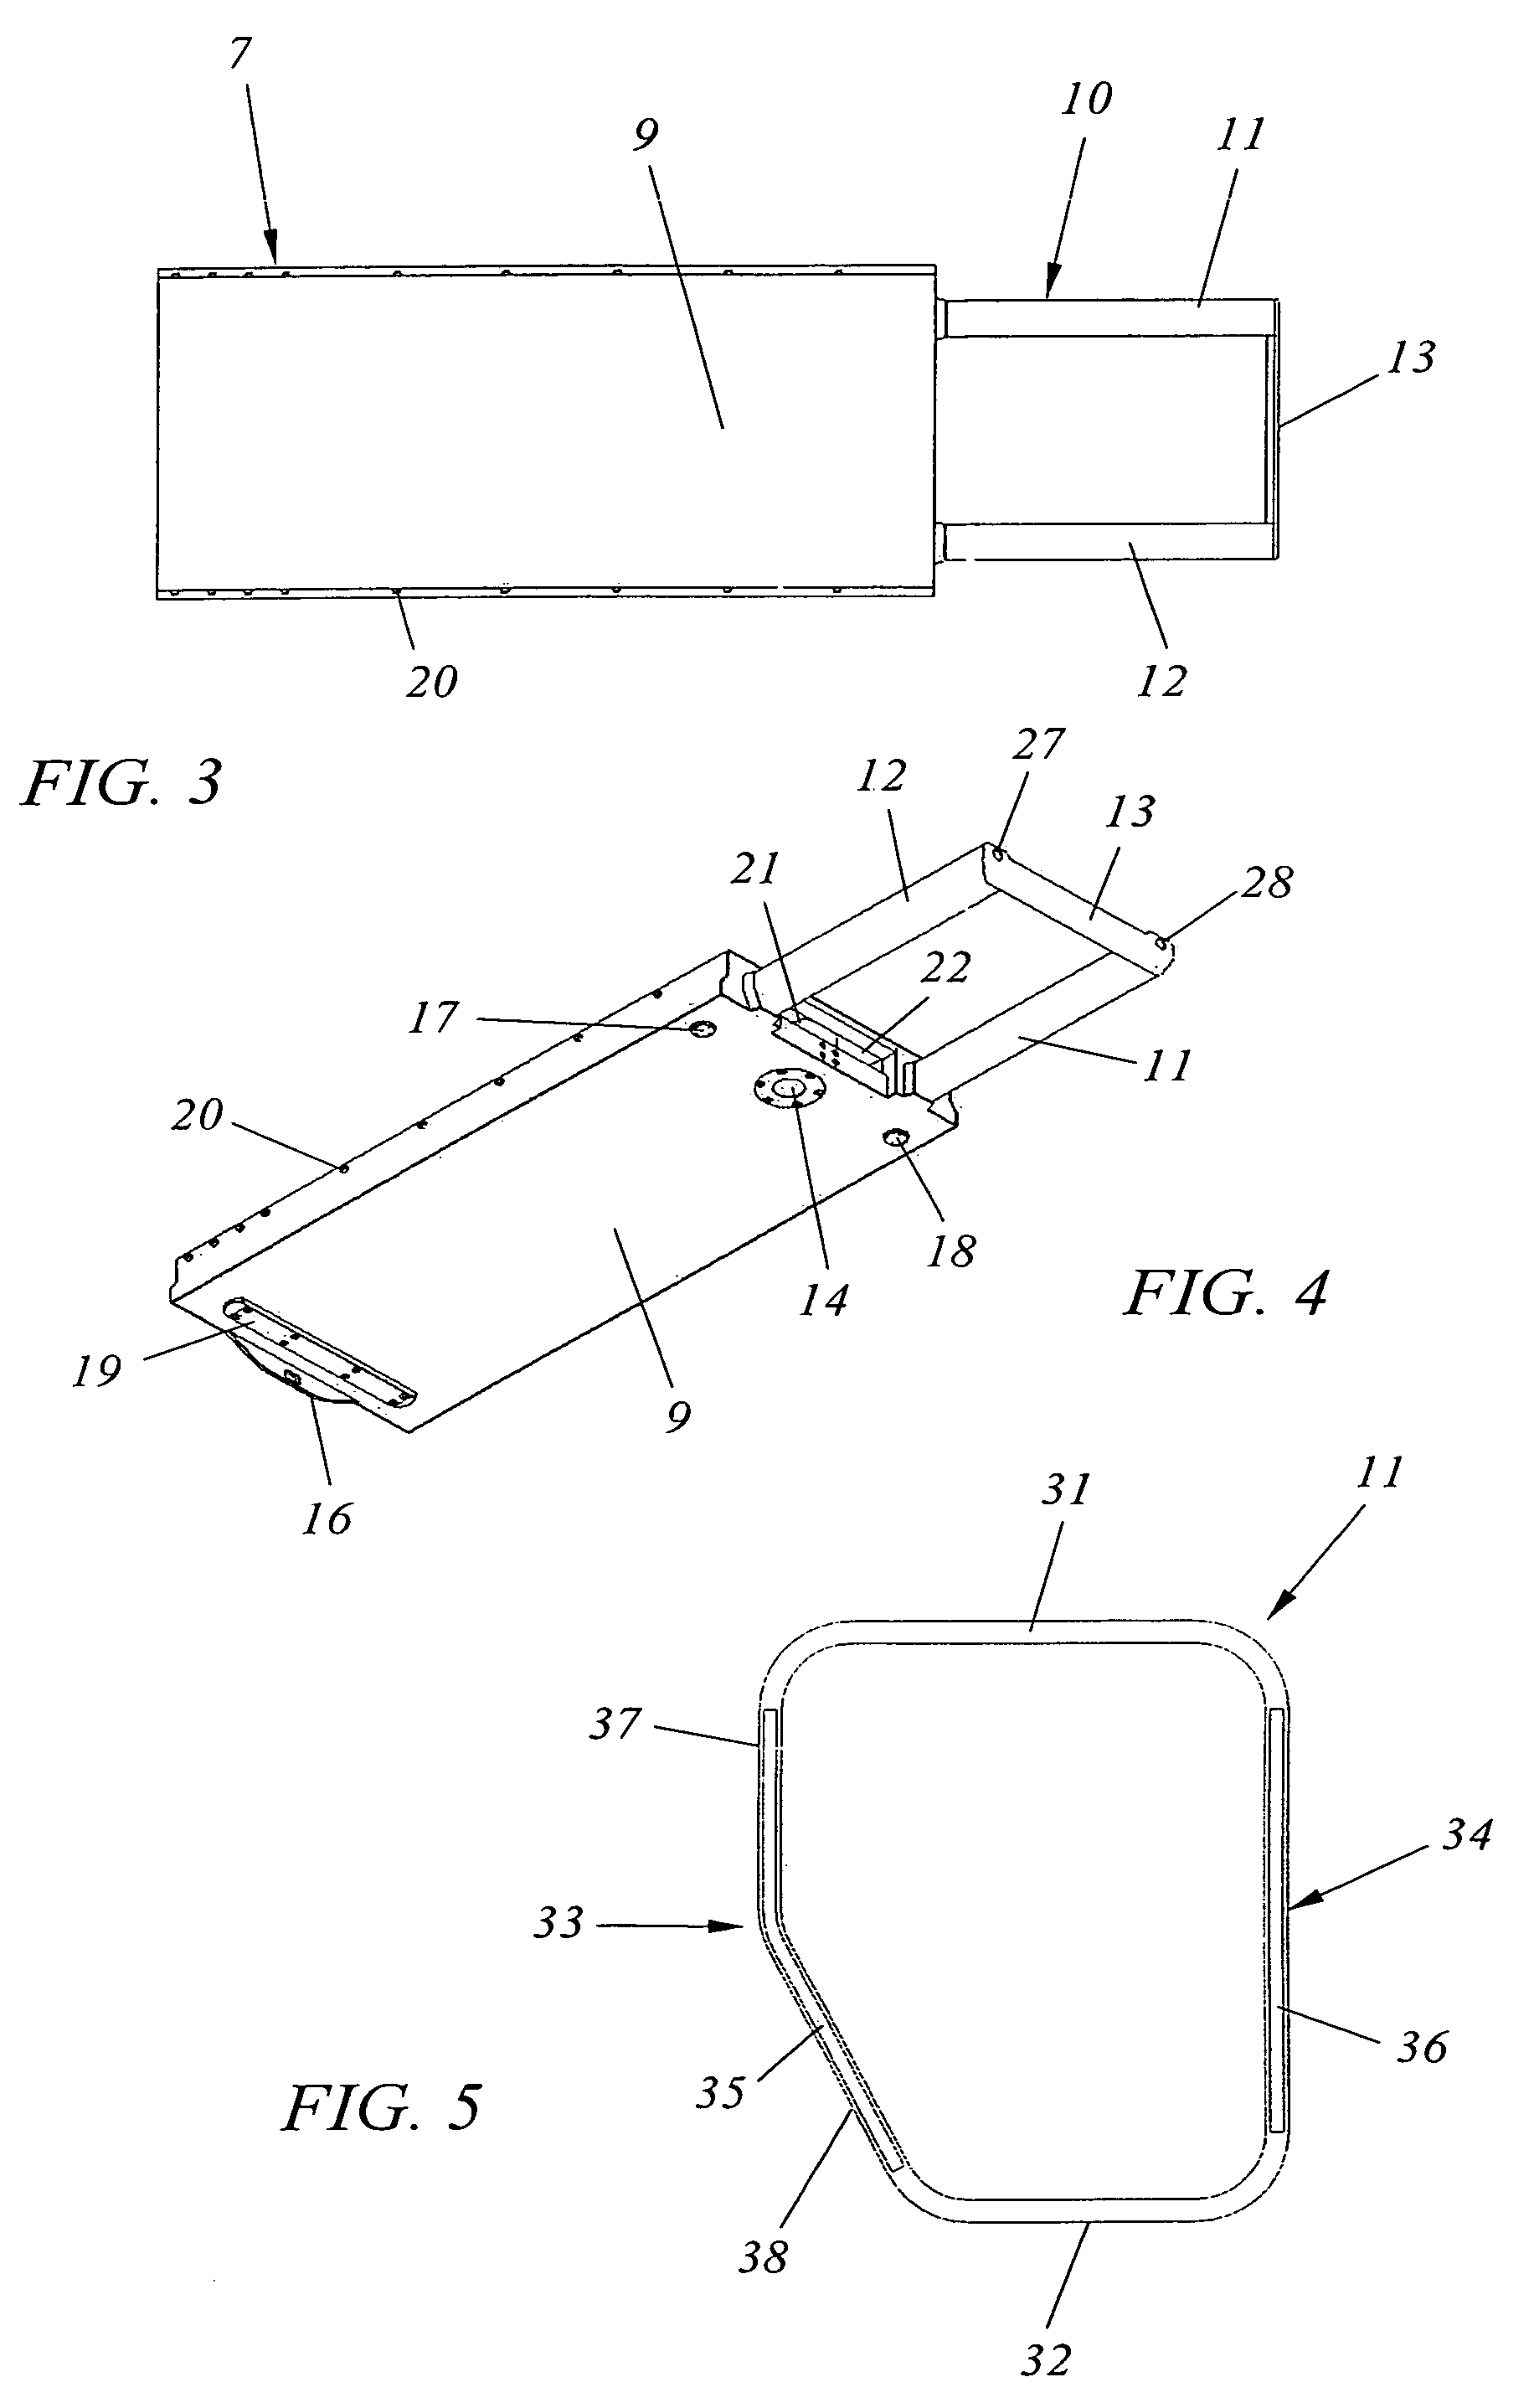 Modular patient support system for use in radiotherapy treatments